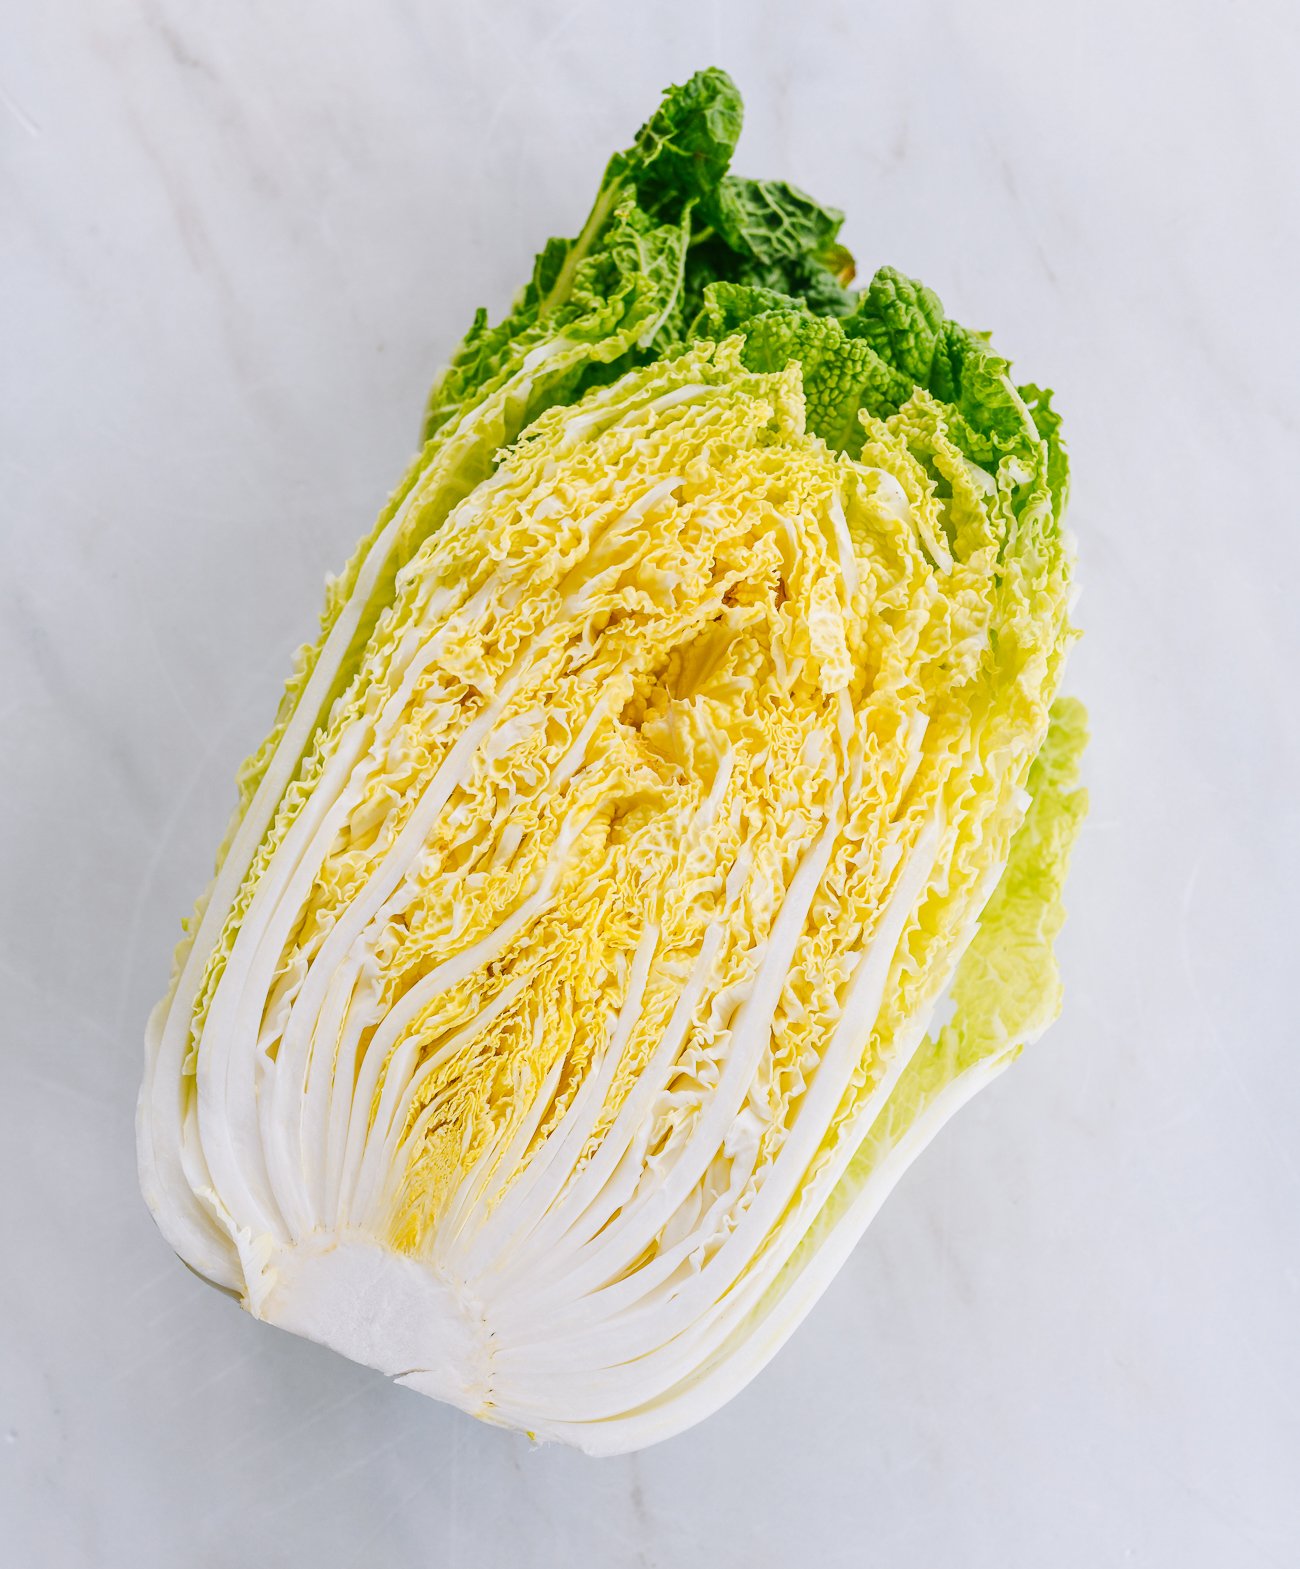 cross-section of napa cabbage